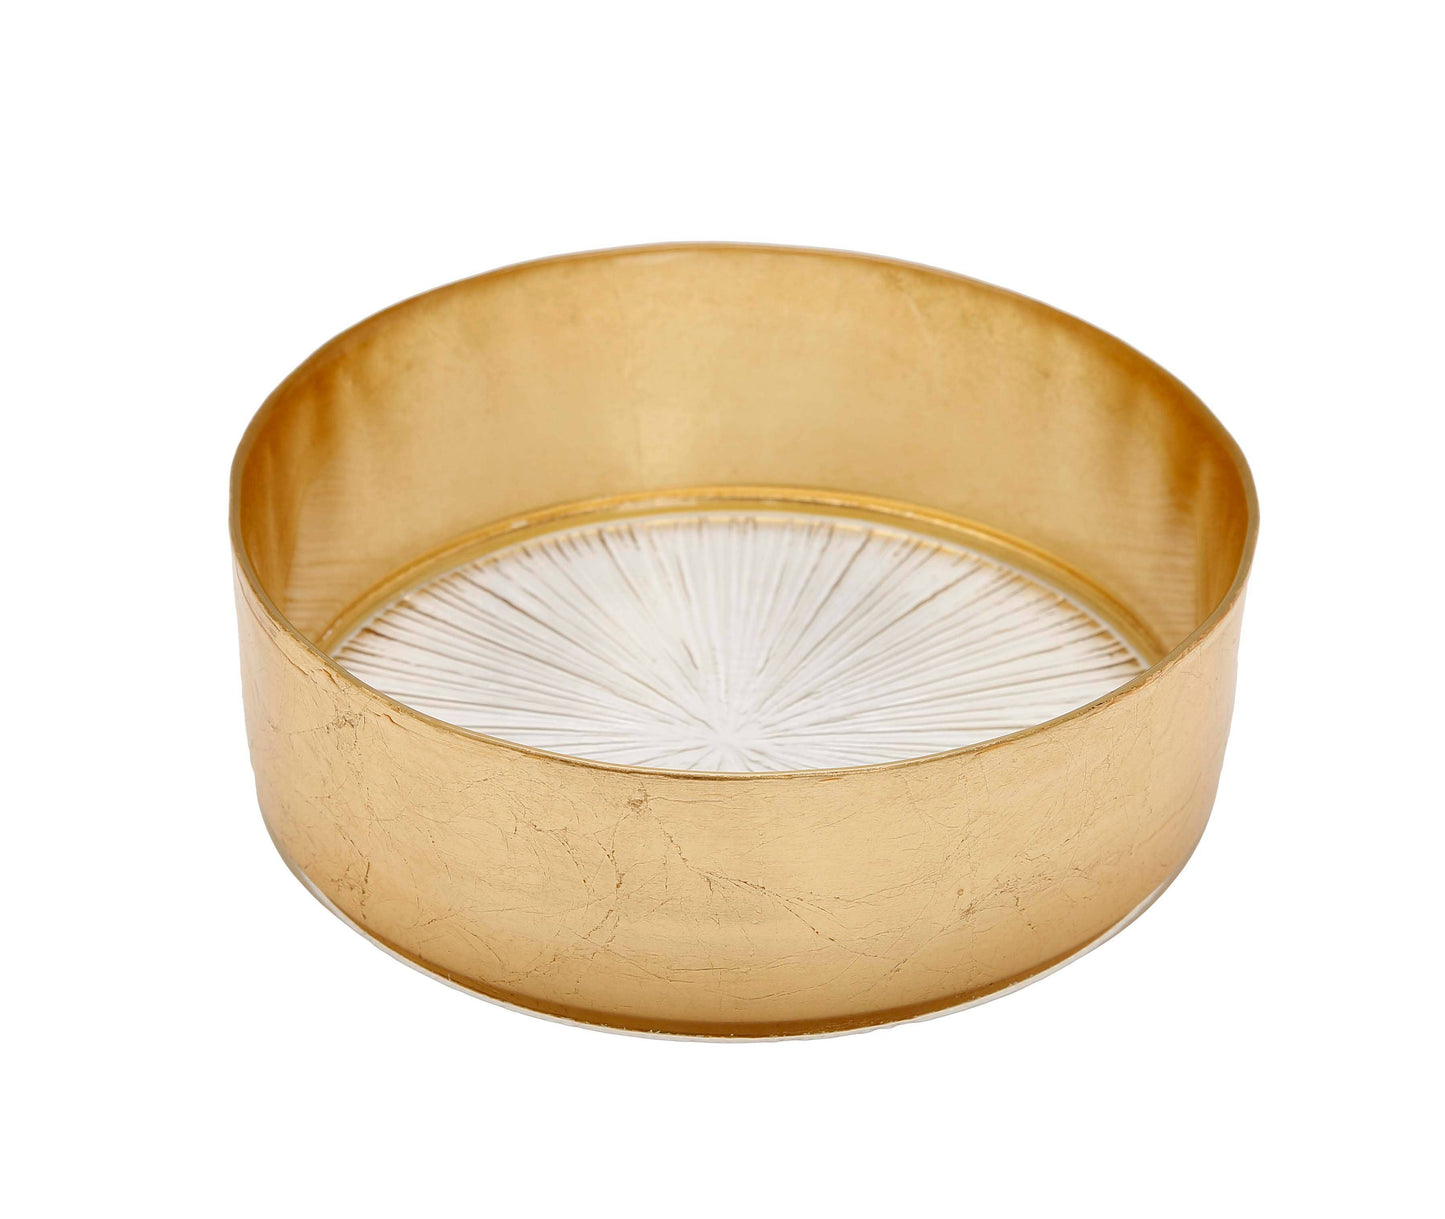 Crystal Glass Bowl with Gold Border